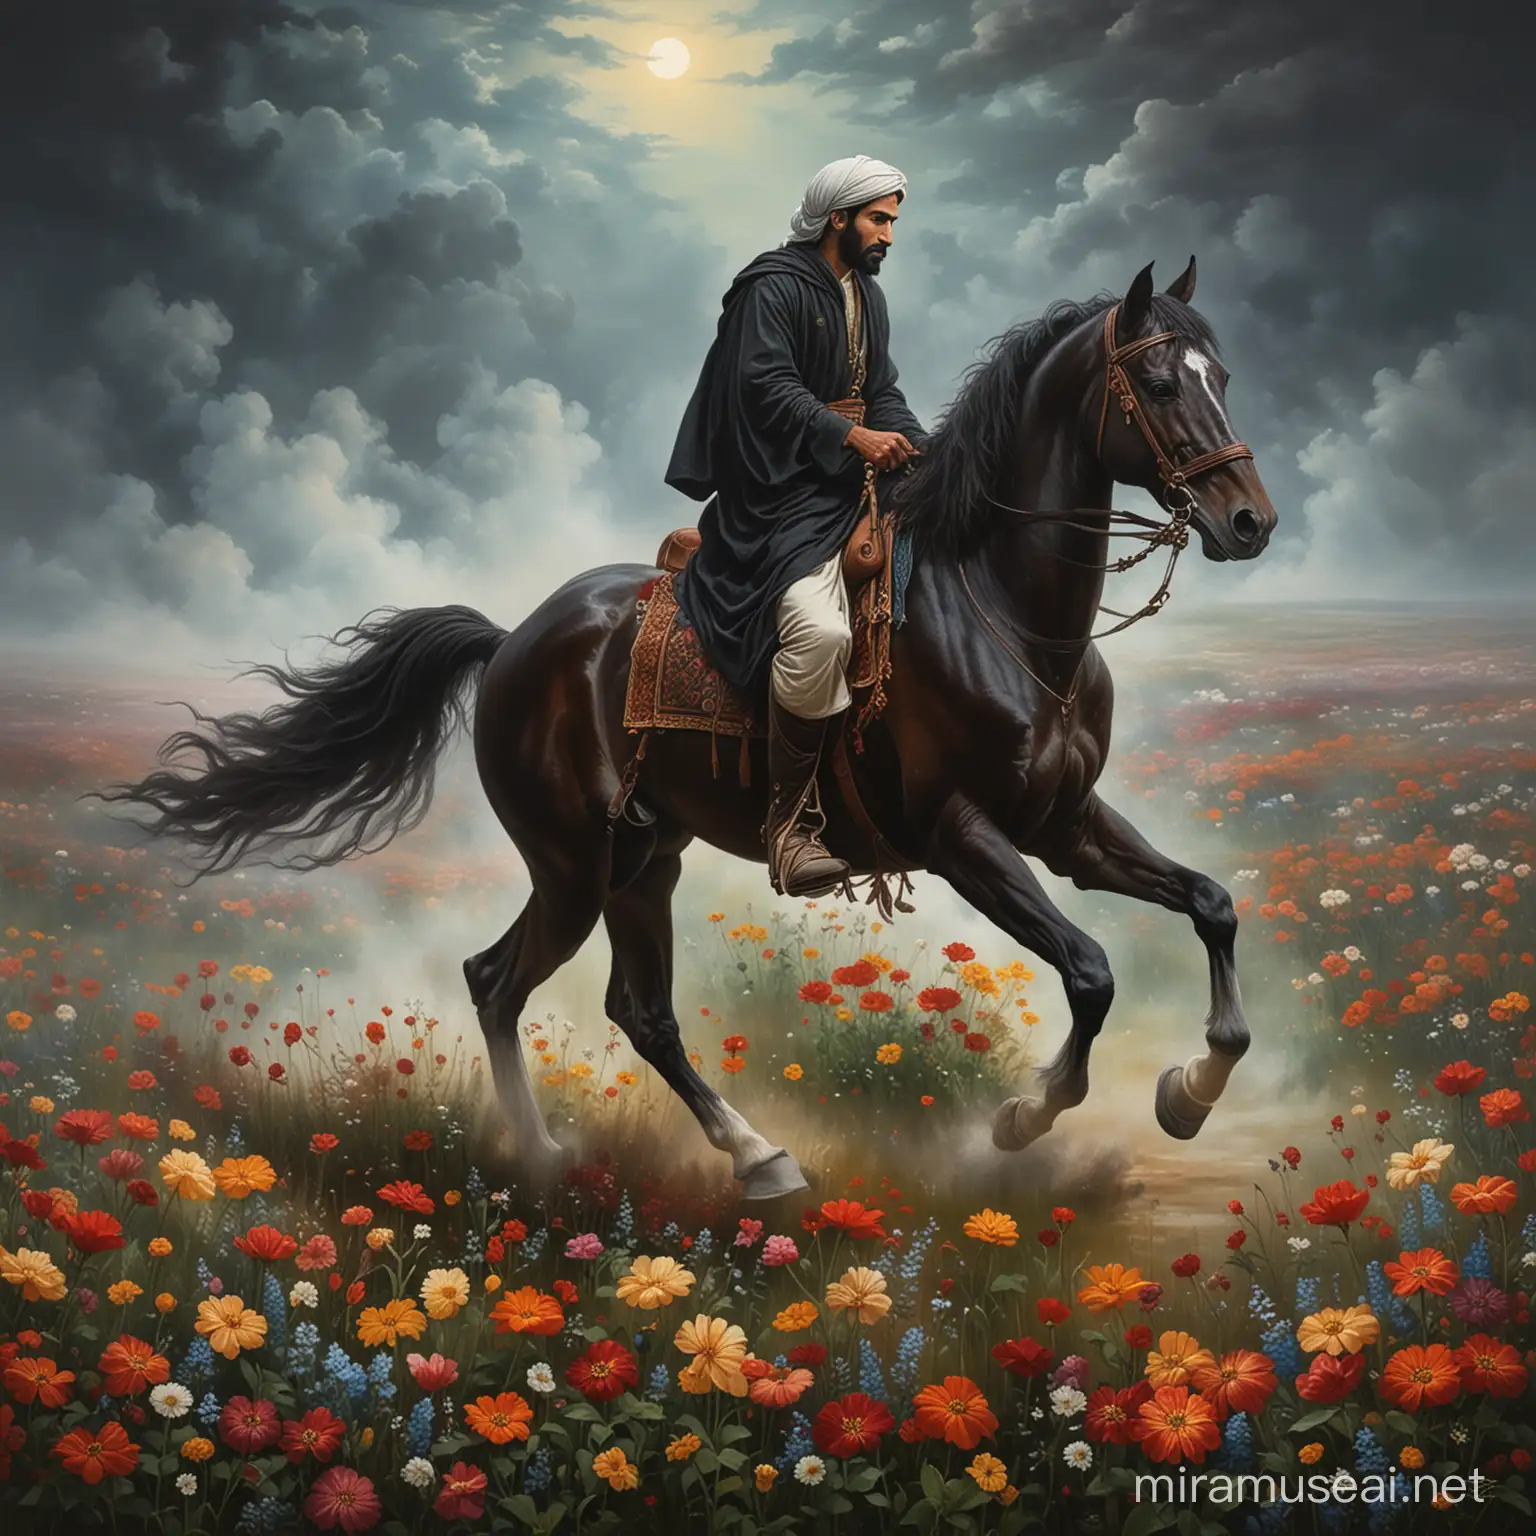 Imam hussain on horse and field of flowers , a mist of night ,impressionism  art , painting, style of old master work 